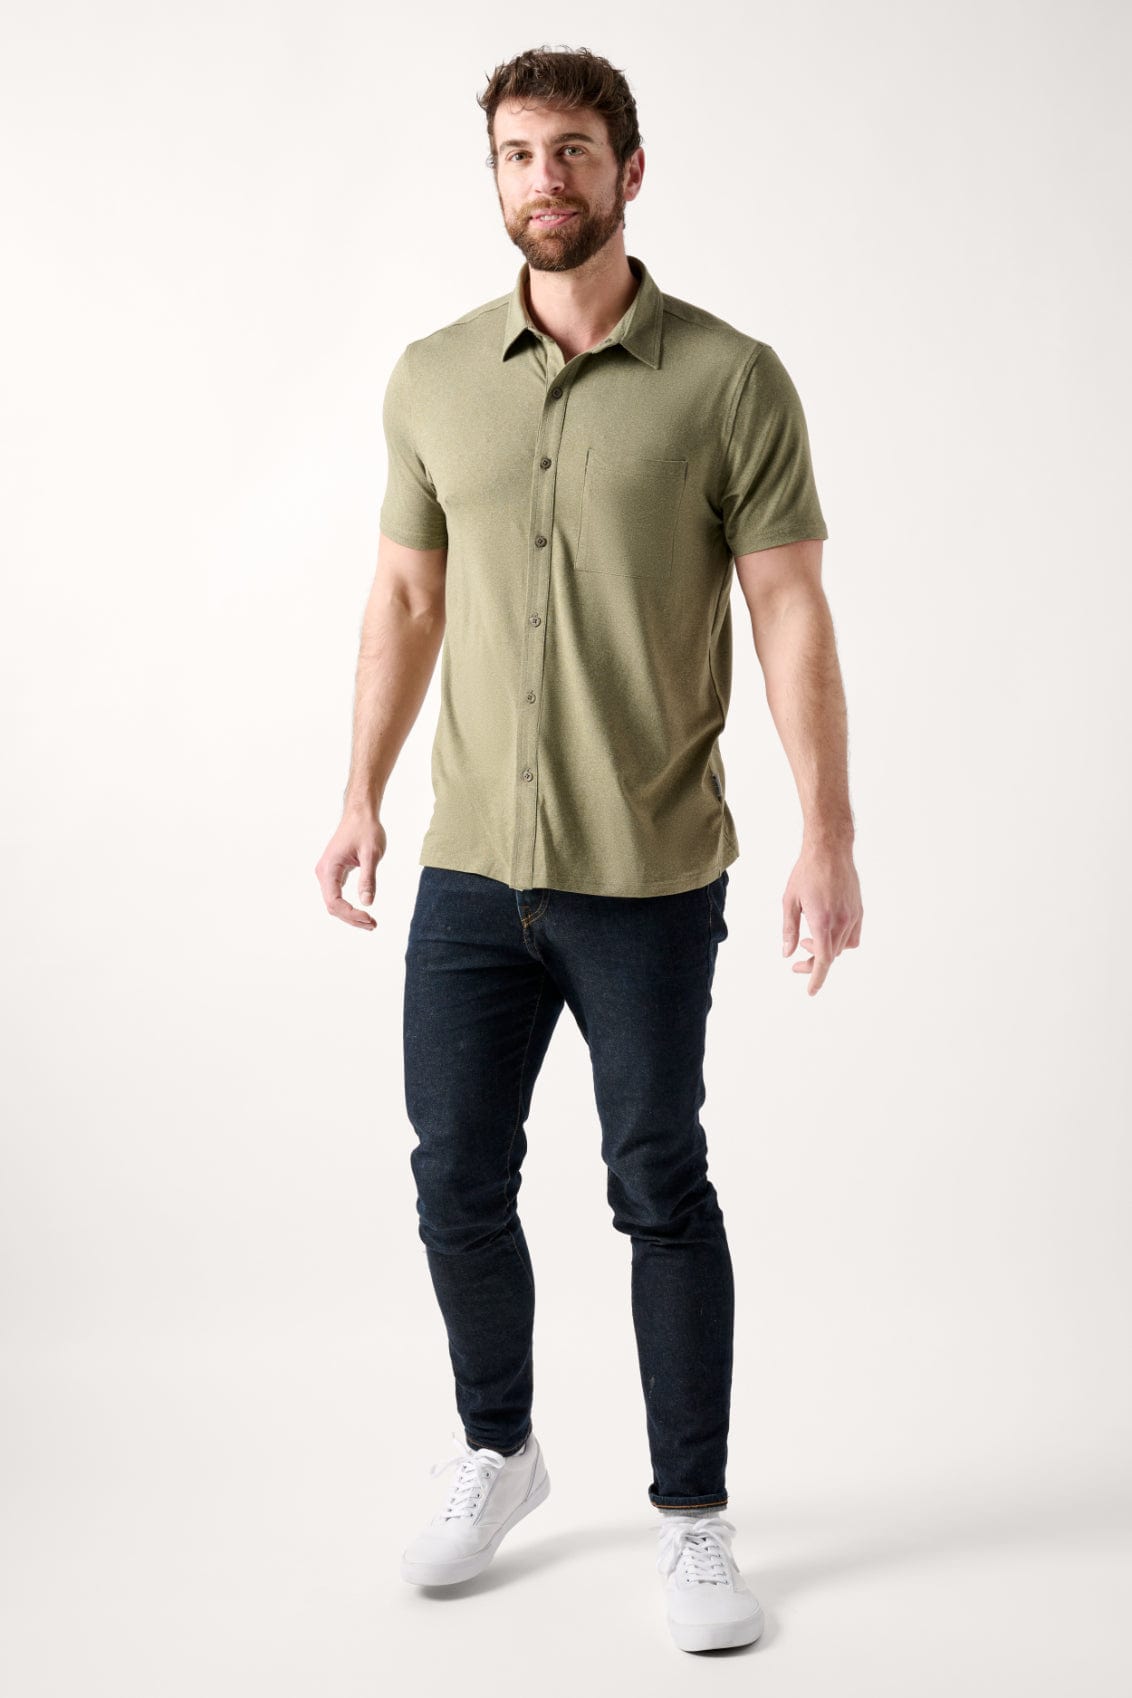 Male dressed in casual style with the All Day Performance Shirt in Four Leaf Clover Heather